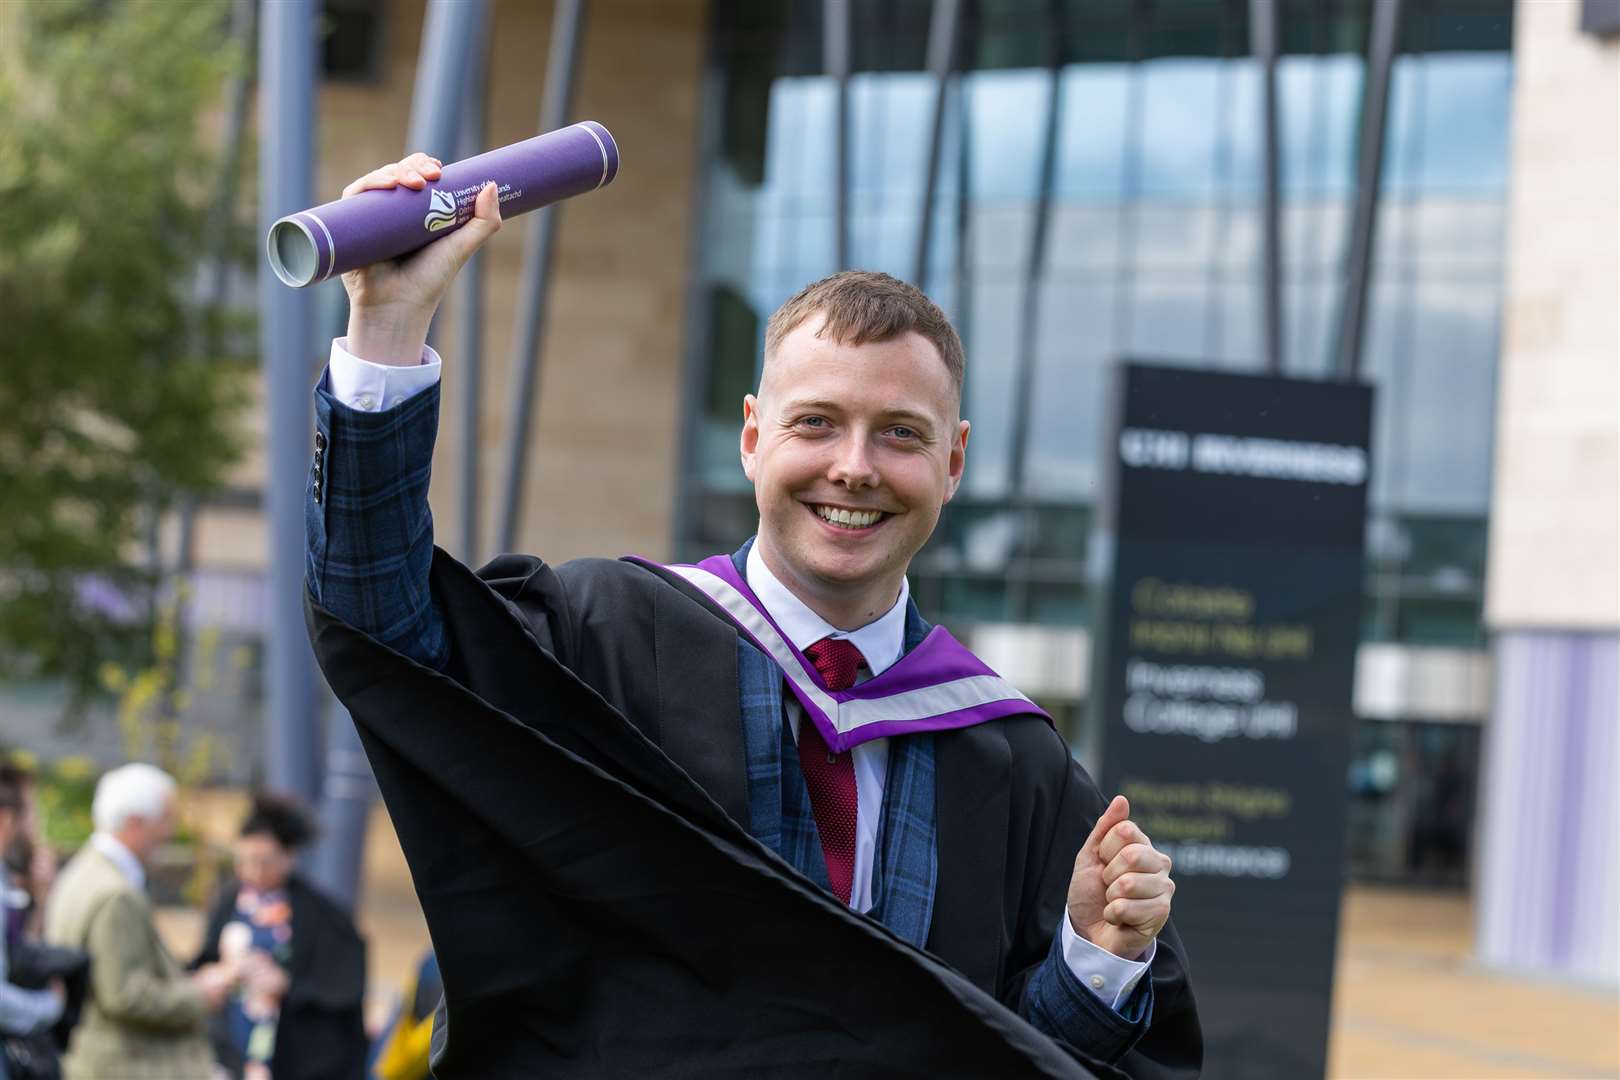 Former Inverness HISA president George Gunn of Brora graduated BSc (Hons) Geographyin 2020 and now works as a Climate Change Strategy Officer at Moray Council.